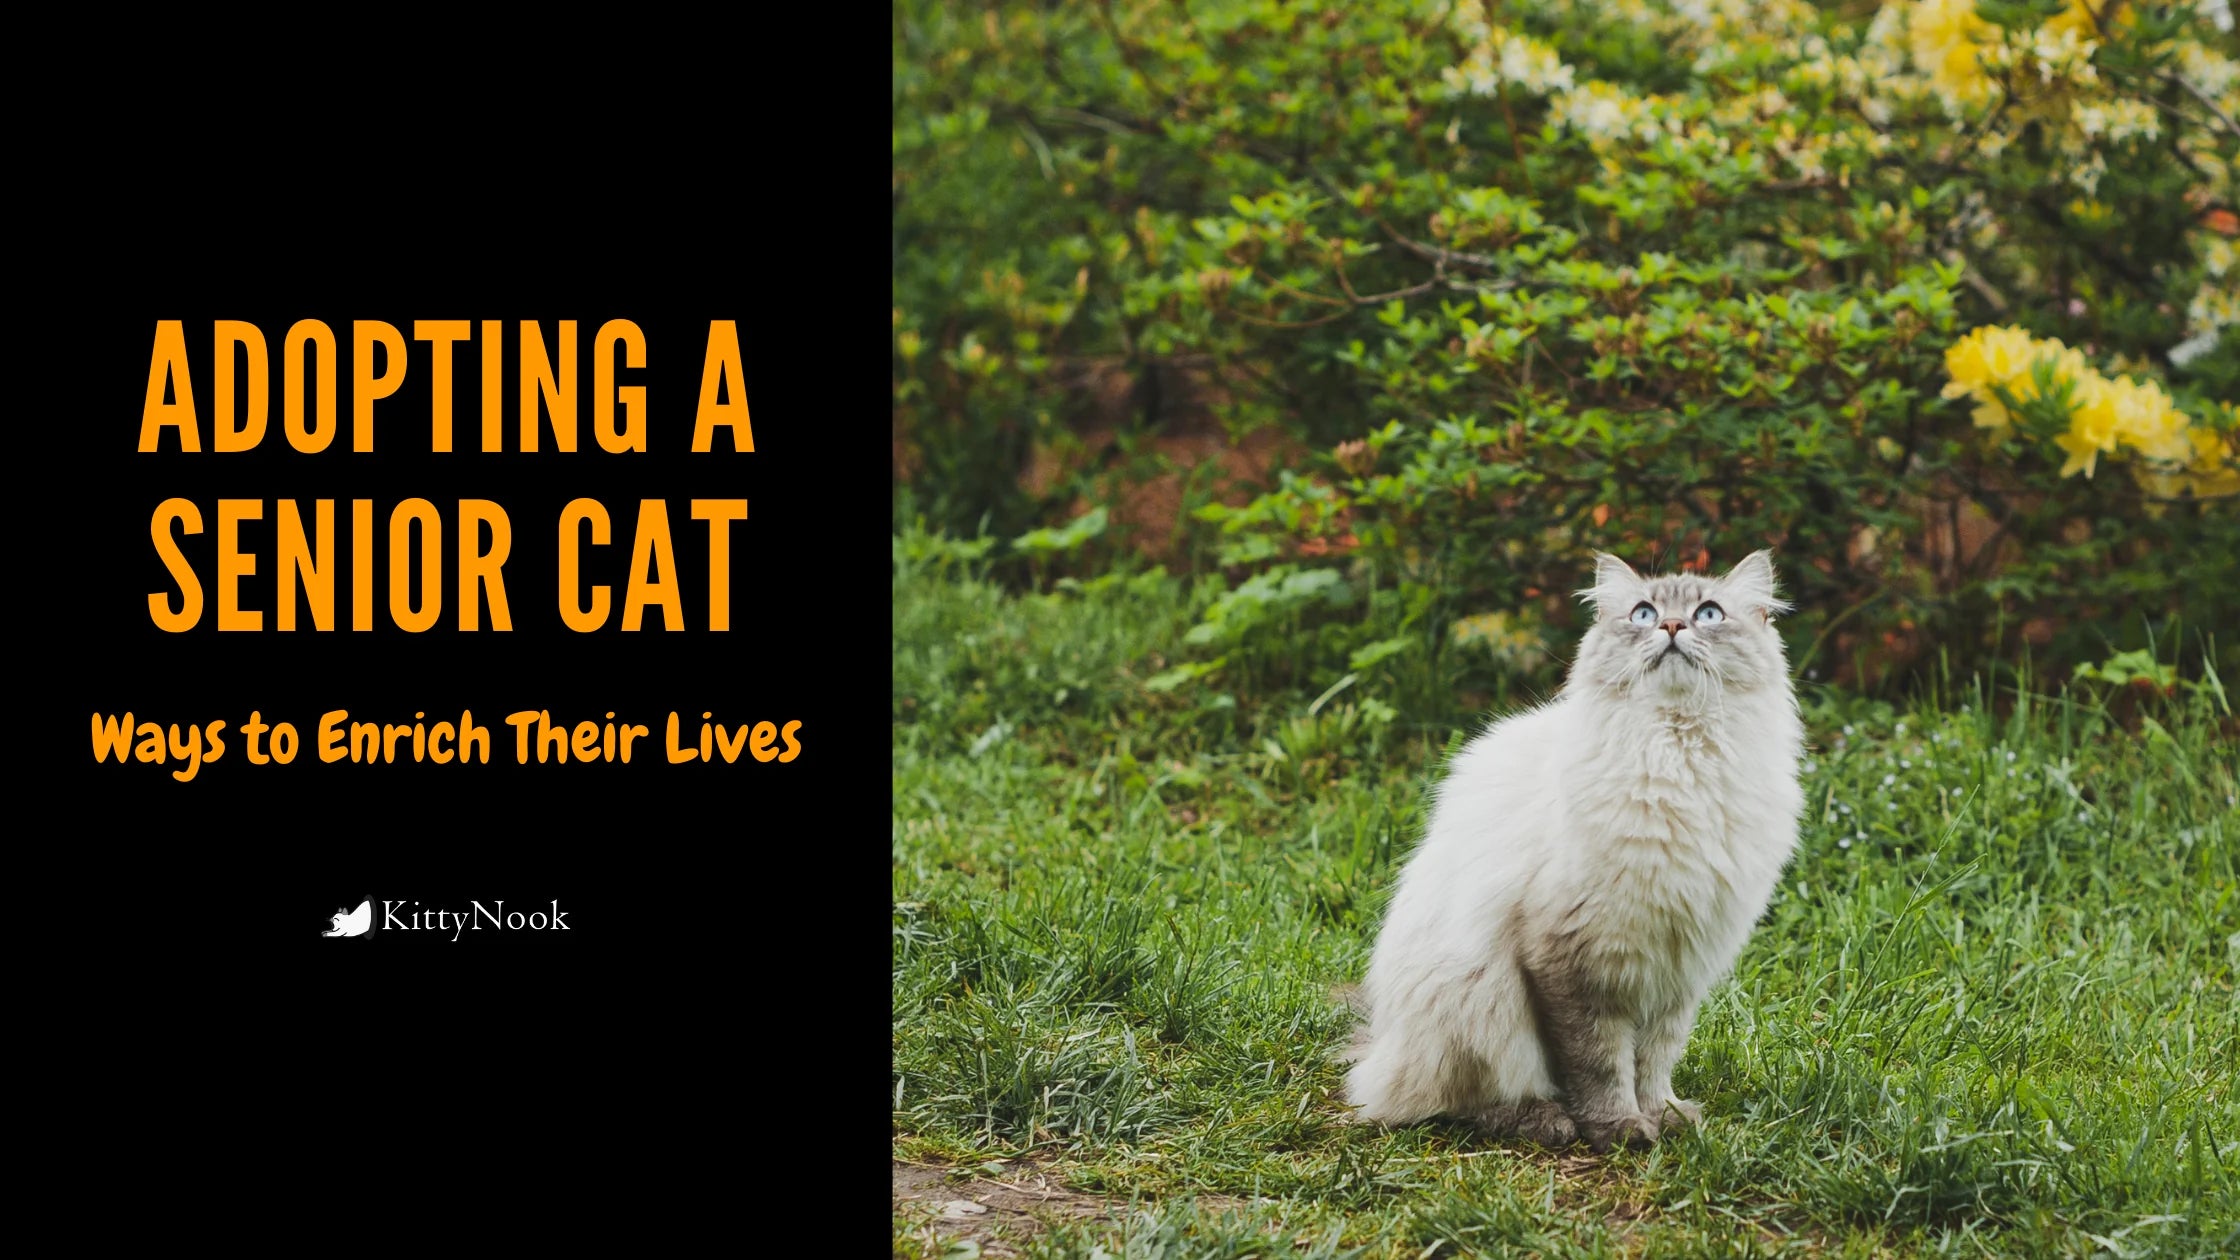 Adopting A Senior Cat: Ways to Enrich Their Lives - KittyNook Cat Company